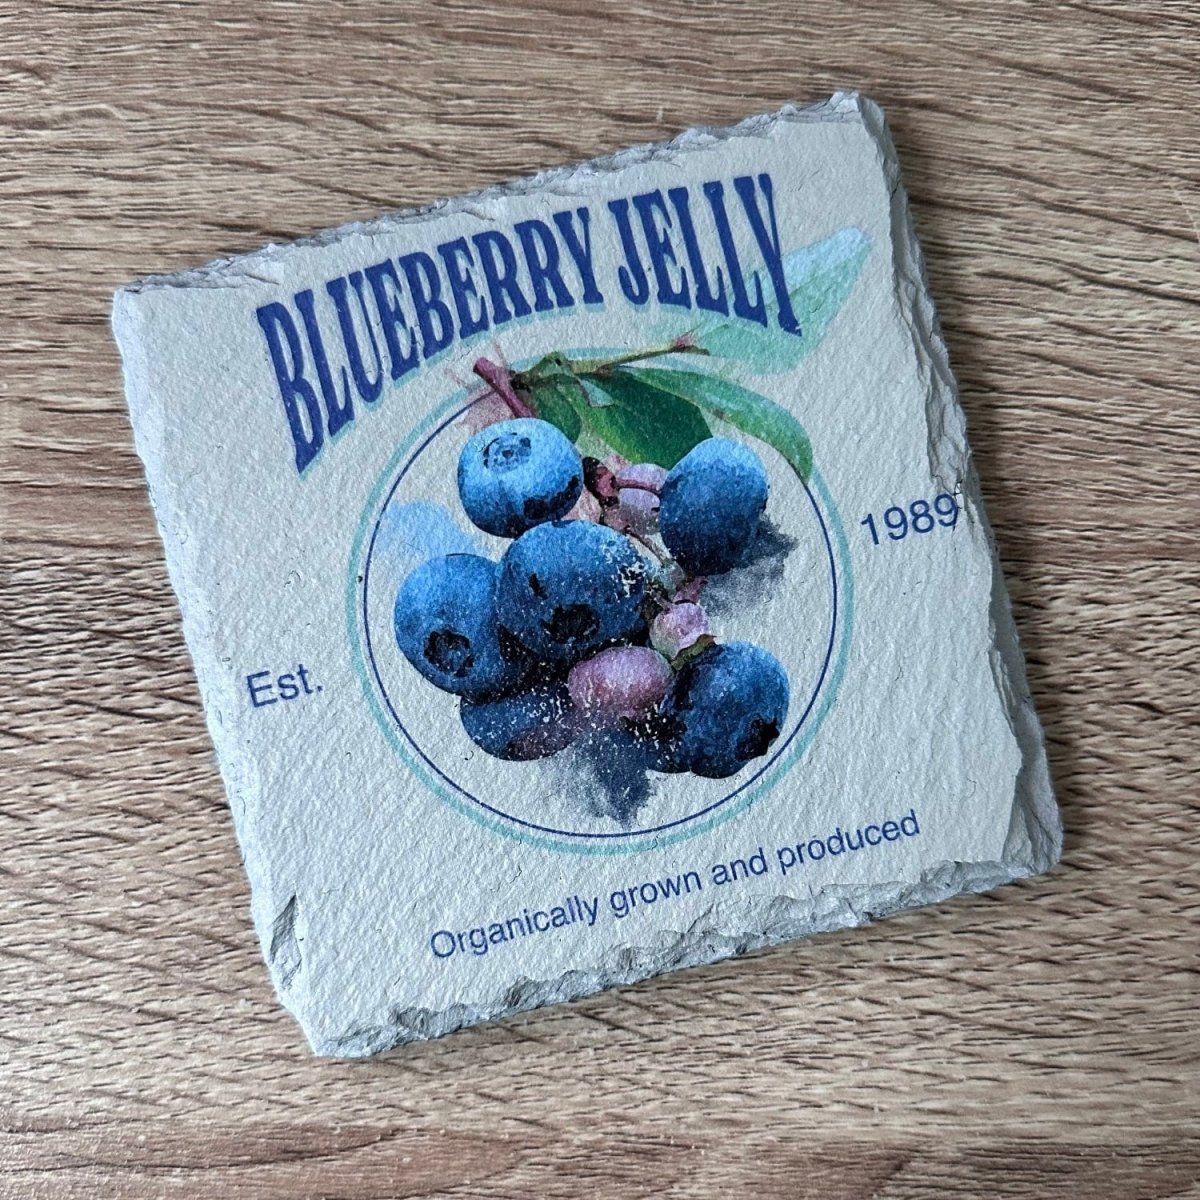 Vintage Fruit Slate Coasters - Blueberry Jelly - GameOn.games